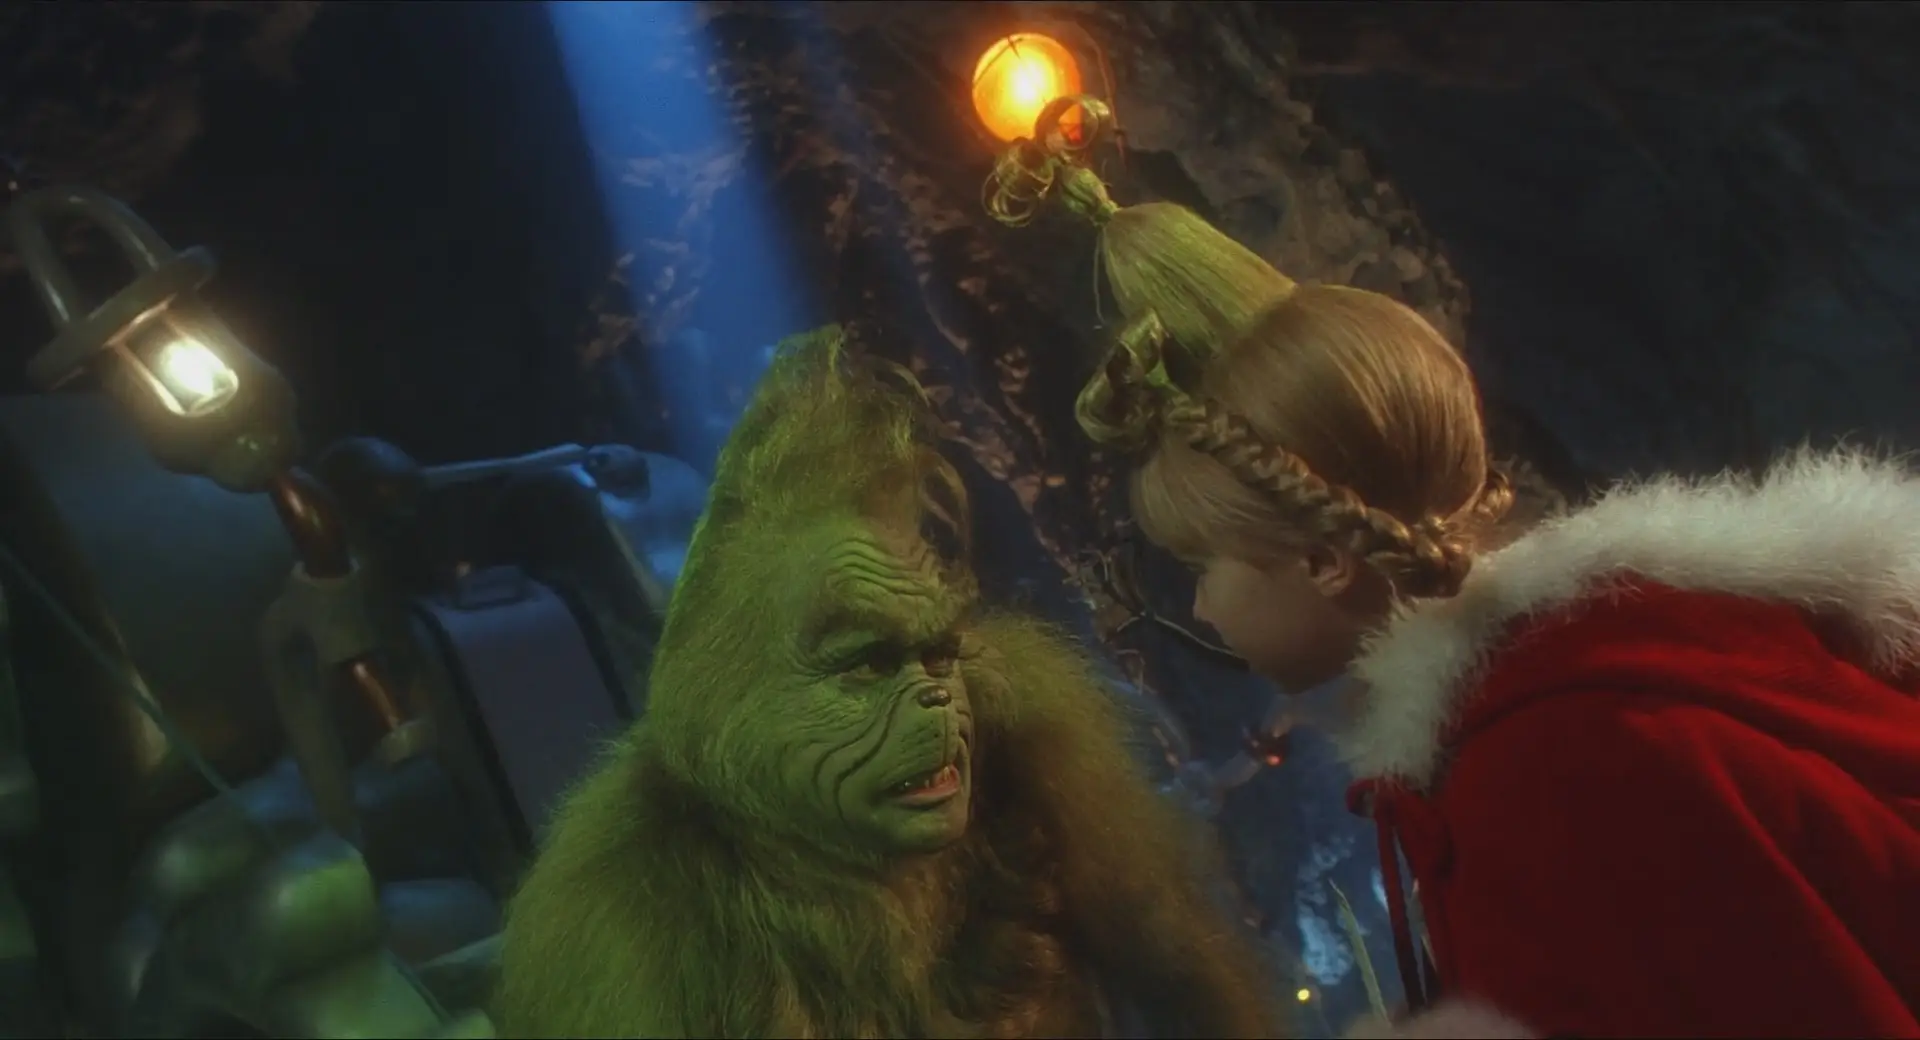 How the Grinch Stole Christmas (2000) 15th Anniversary Remastered Edition.